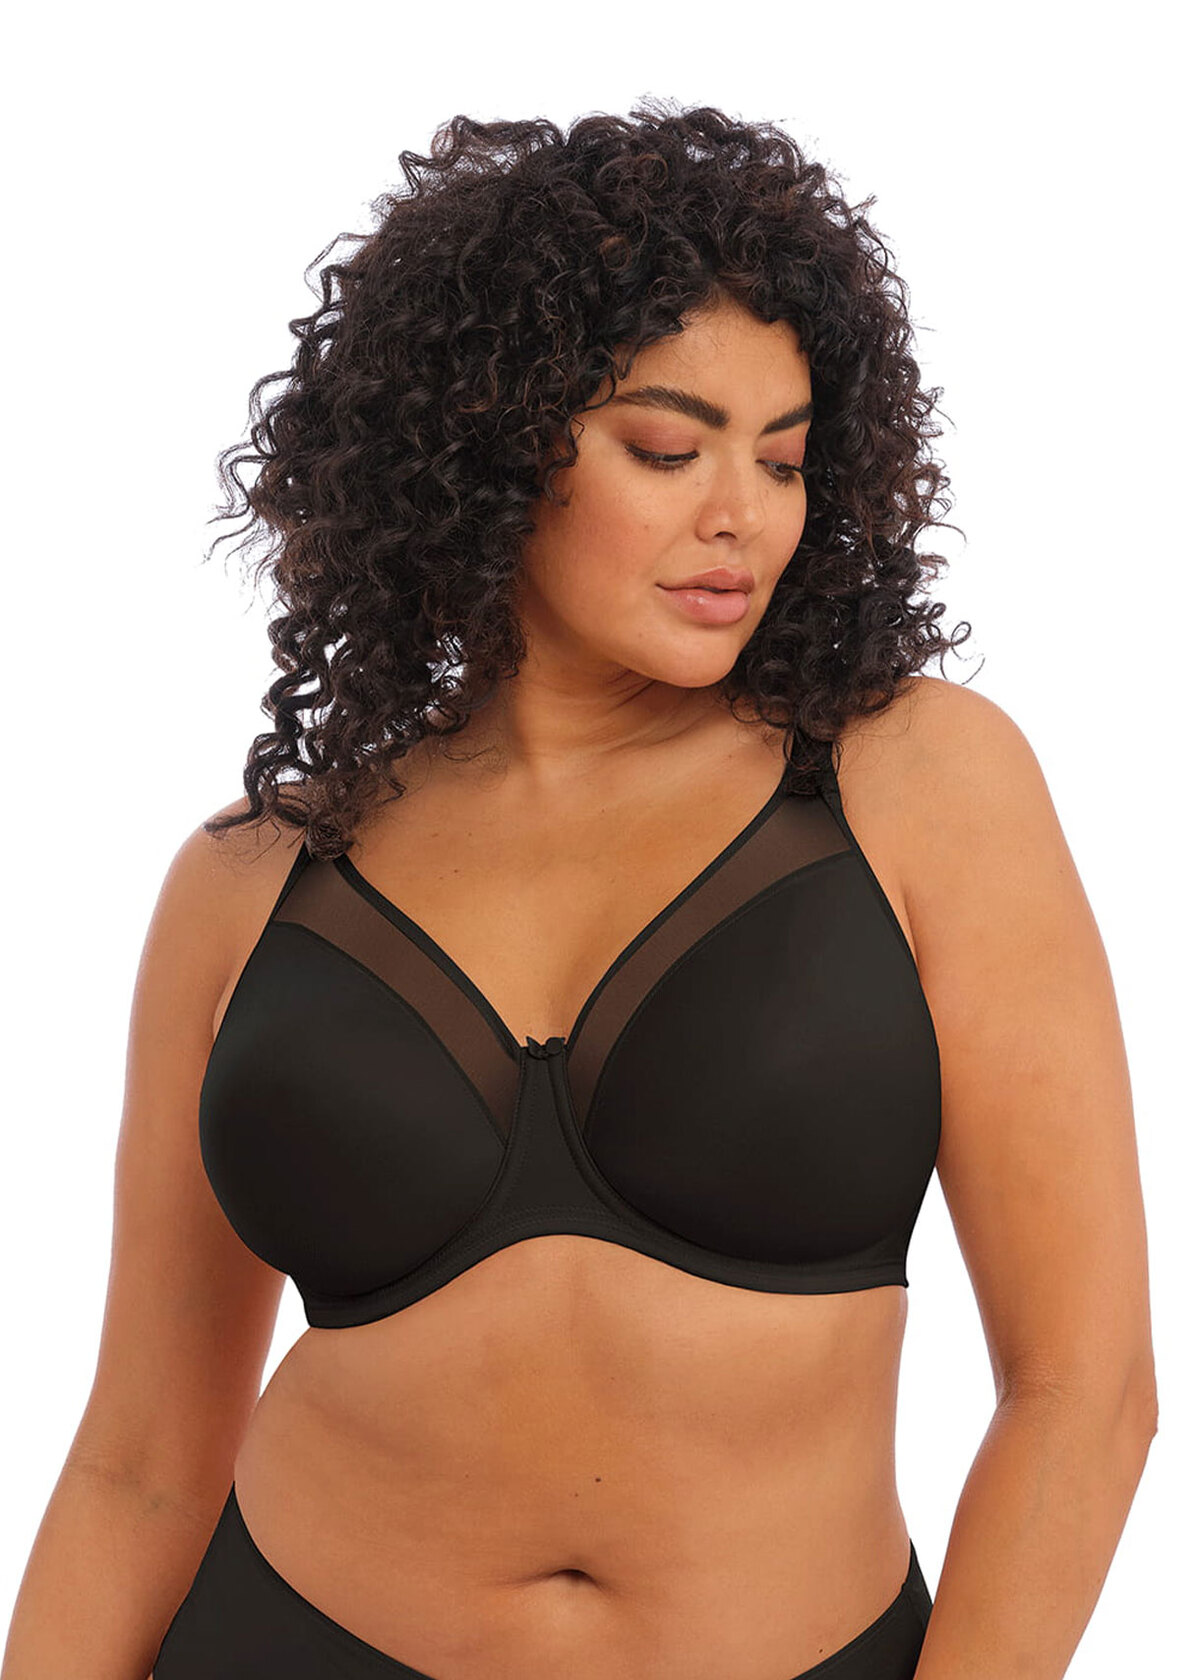  Womens Plus Size Bras Minimizer Underwire Full Coverage  Unlined Seamless Cup Cameo Heather 34G